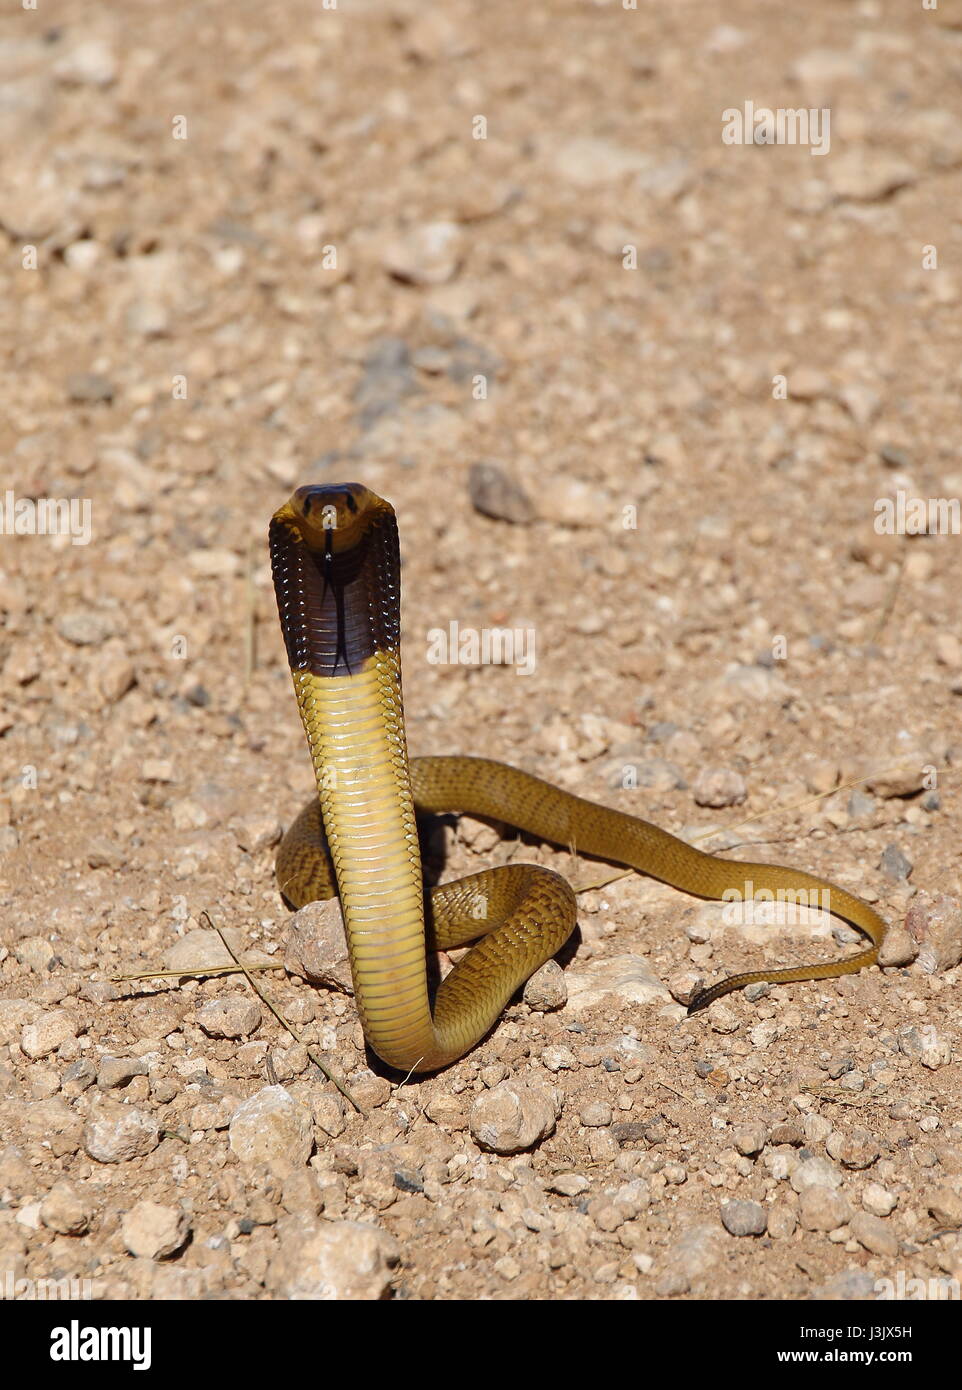 Juvenile Cape cobra a snake endemic to South Africa Stock Photo